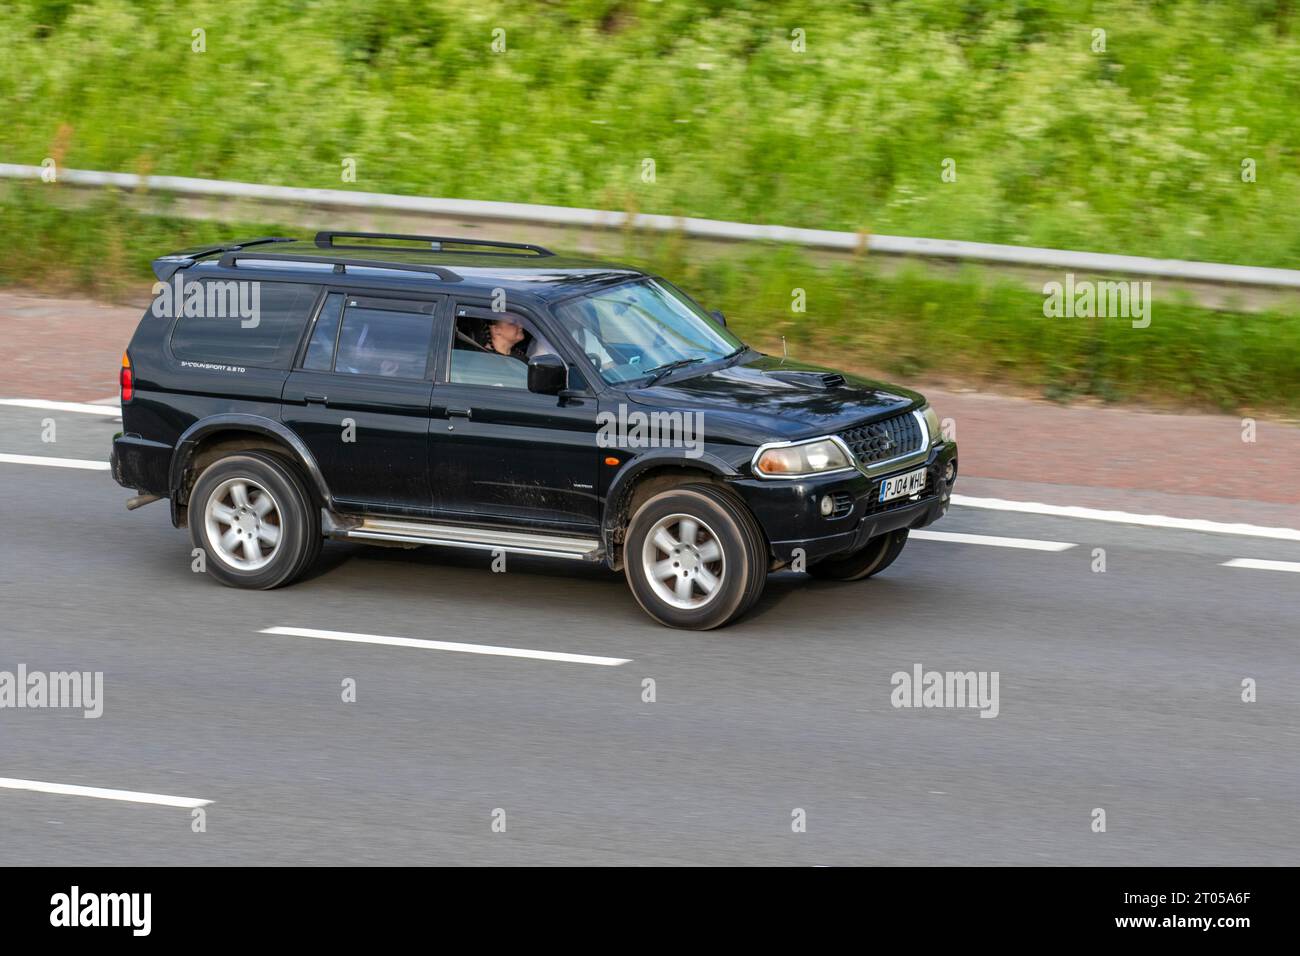 2004 Mitsubishi Shogun Sport TD Warrior 2477cc 5-speed manual; travelling at speed on the M6 motorway in Greater Manchester, UK Stock Photo